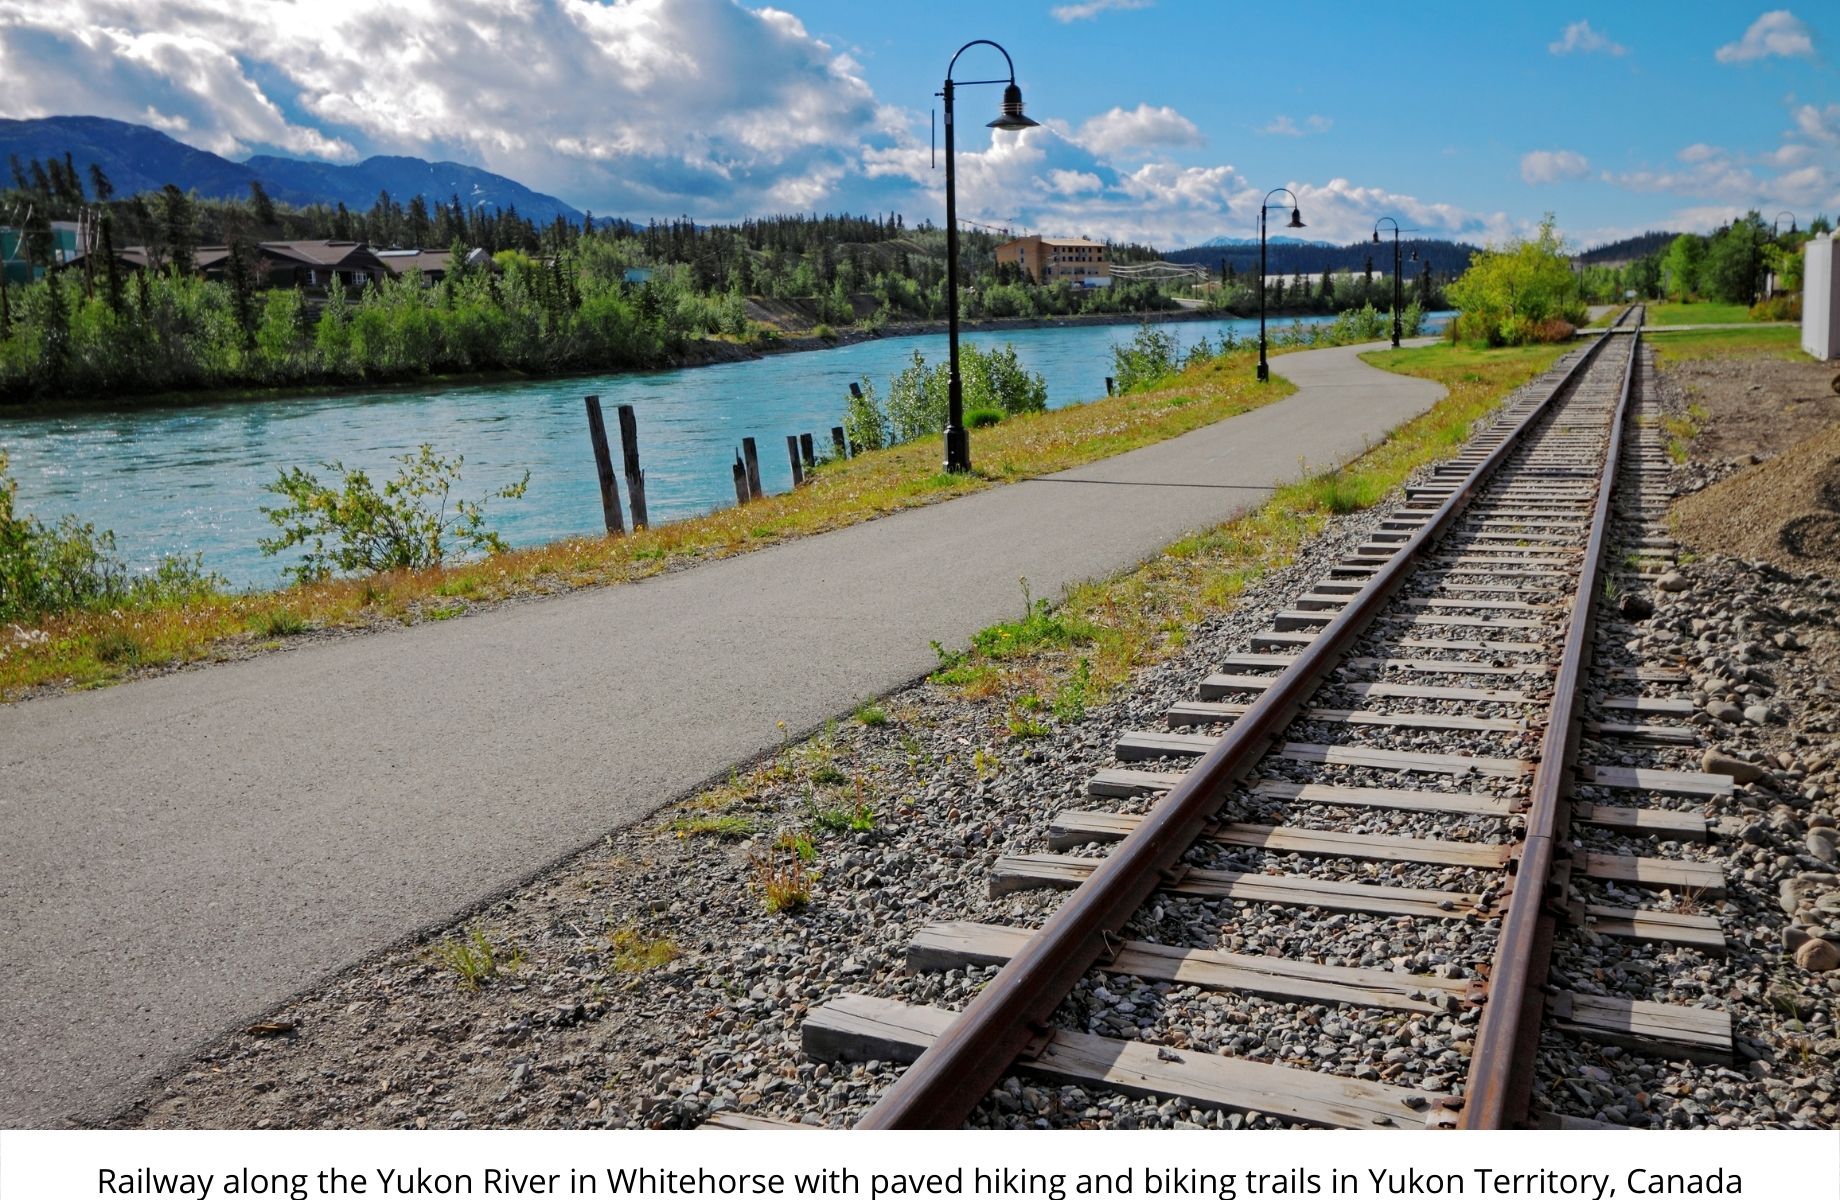 Railway along the Yukon River in Whitehorse with paved hiking and biking trails in Yukon Territorv, Canada